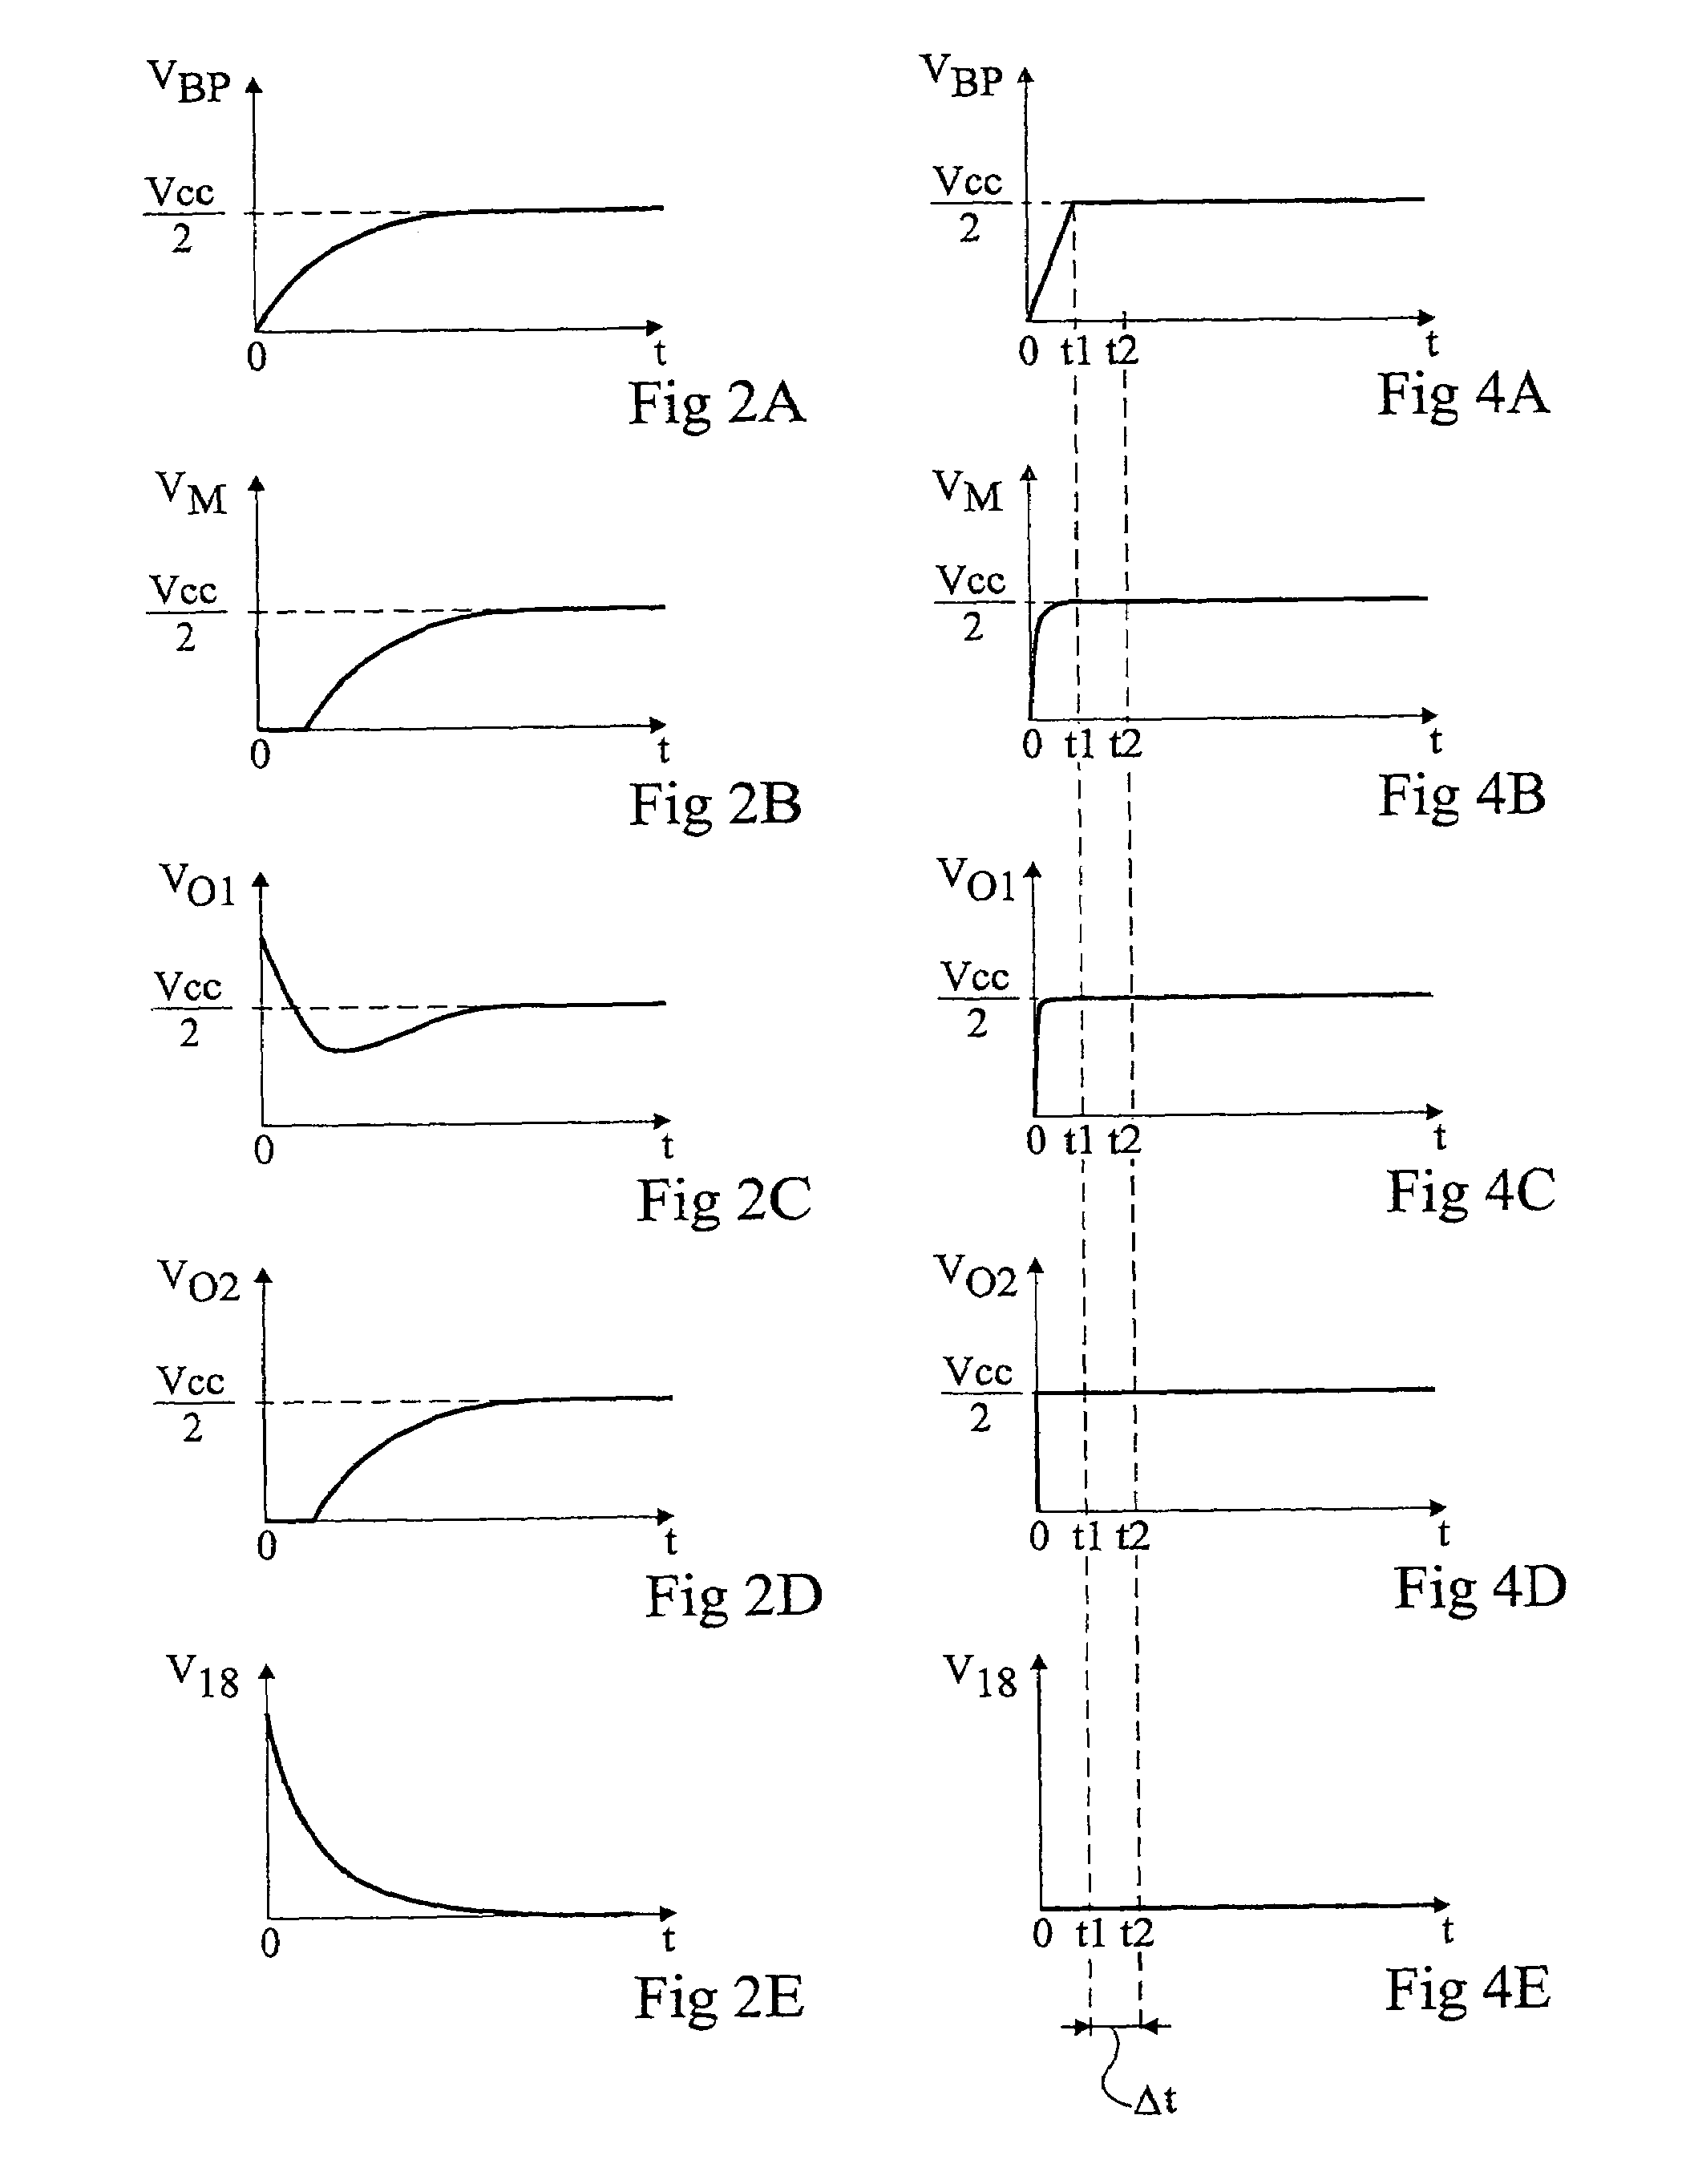 Audio amplifier circuit with suppression of unwanted noise when starting from an off or standby state